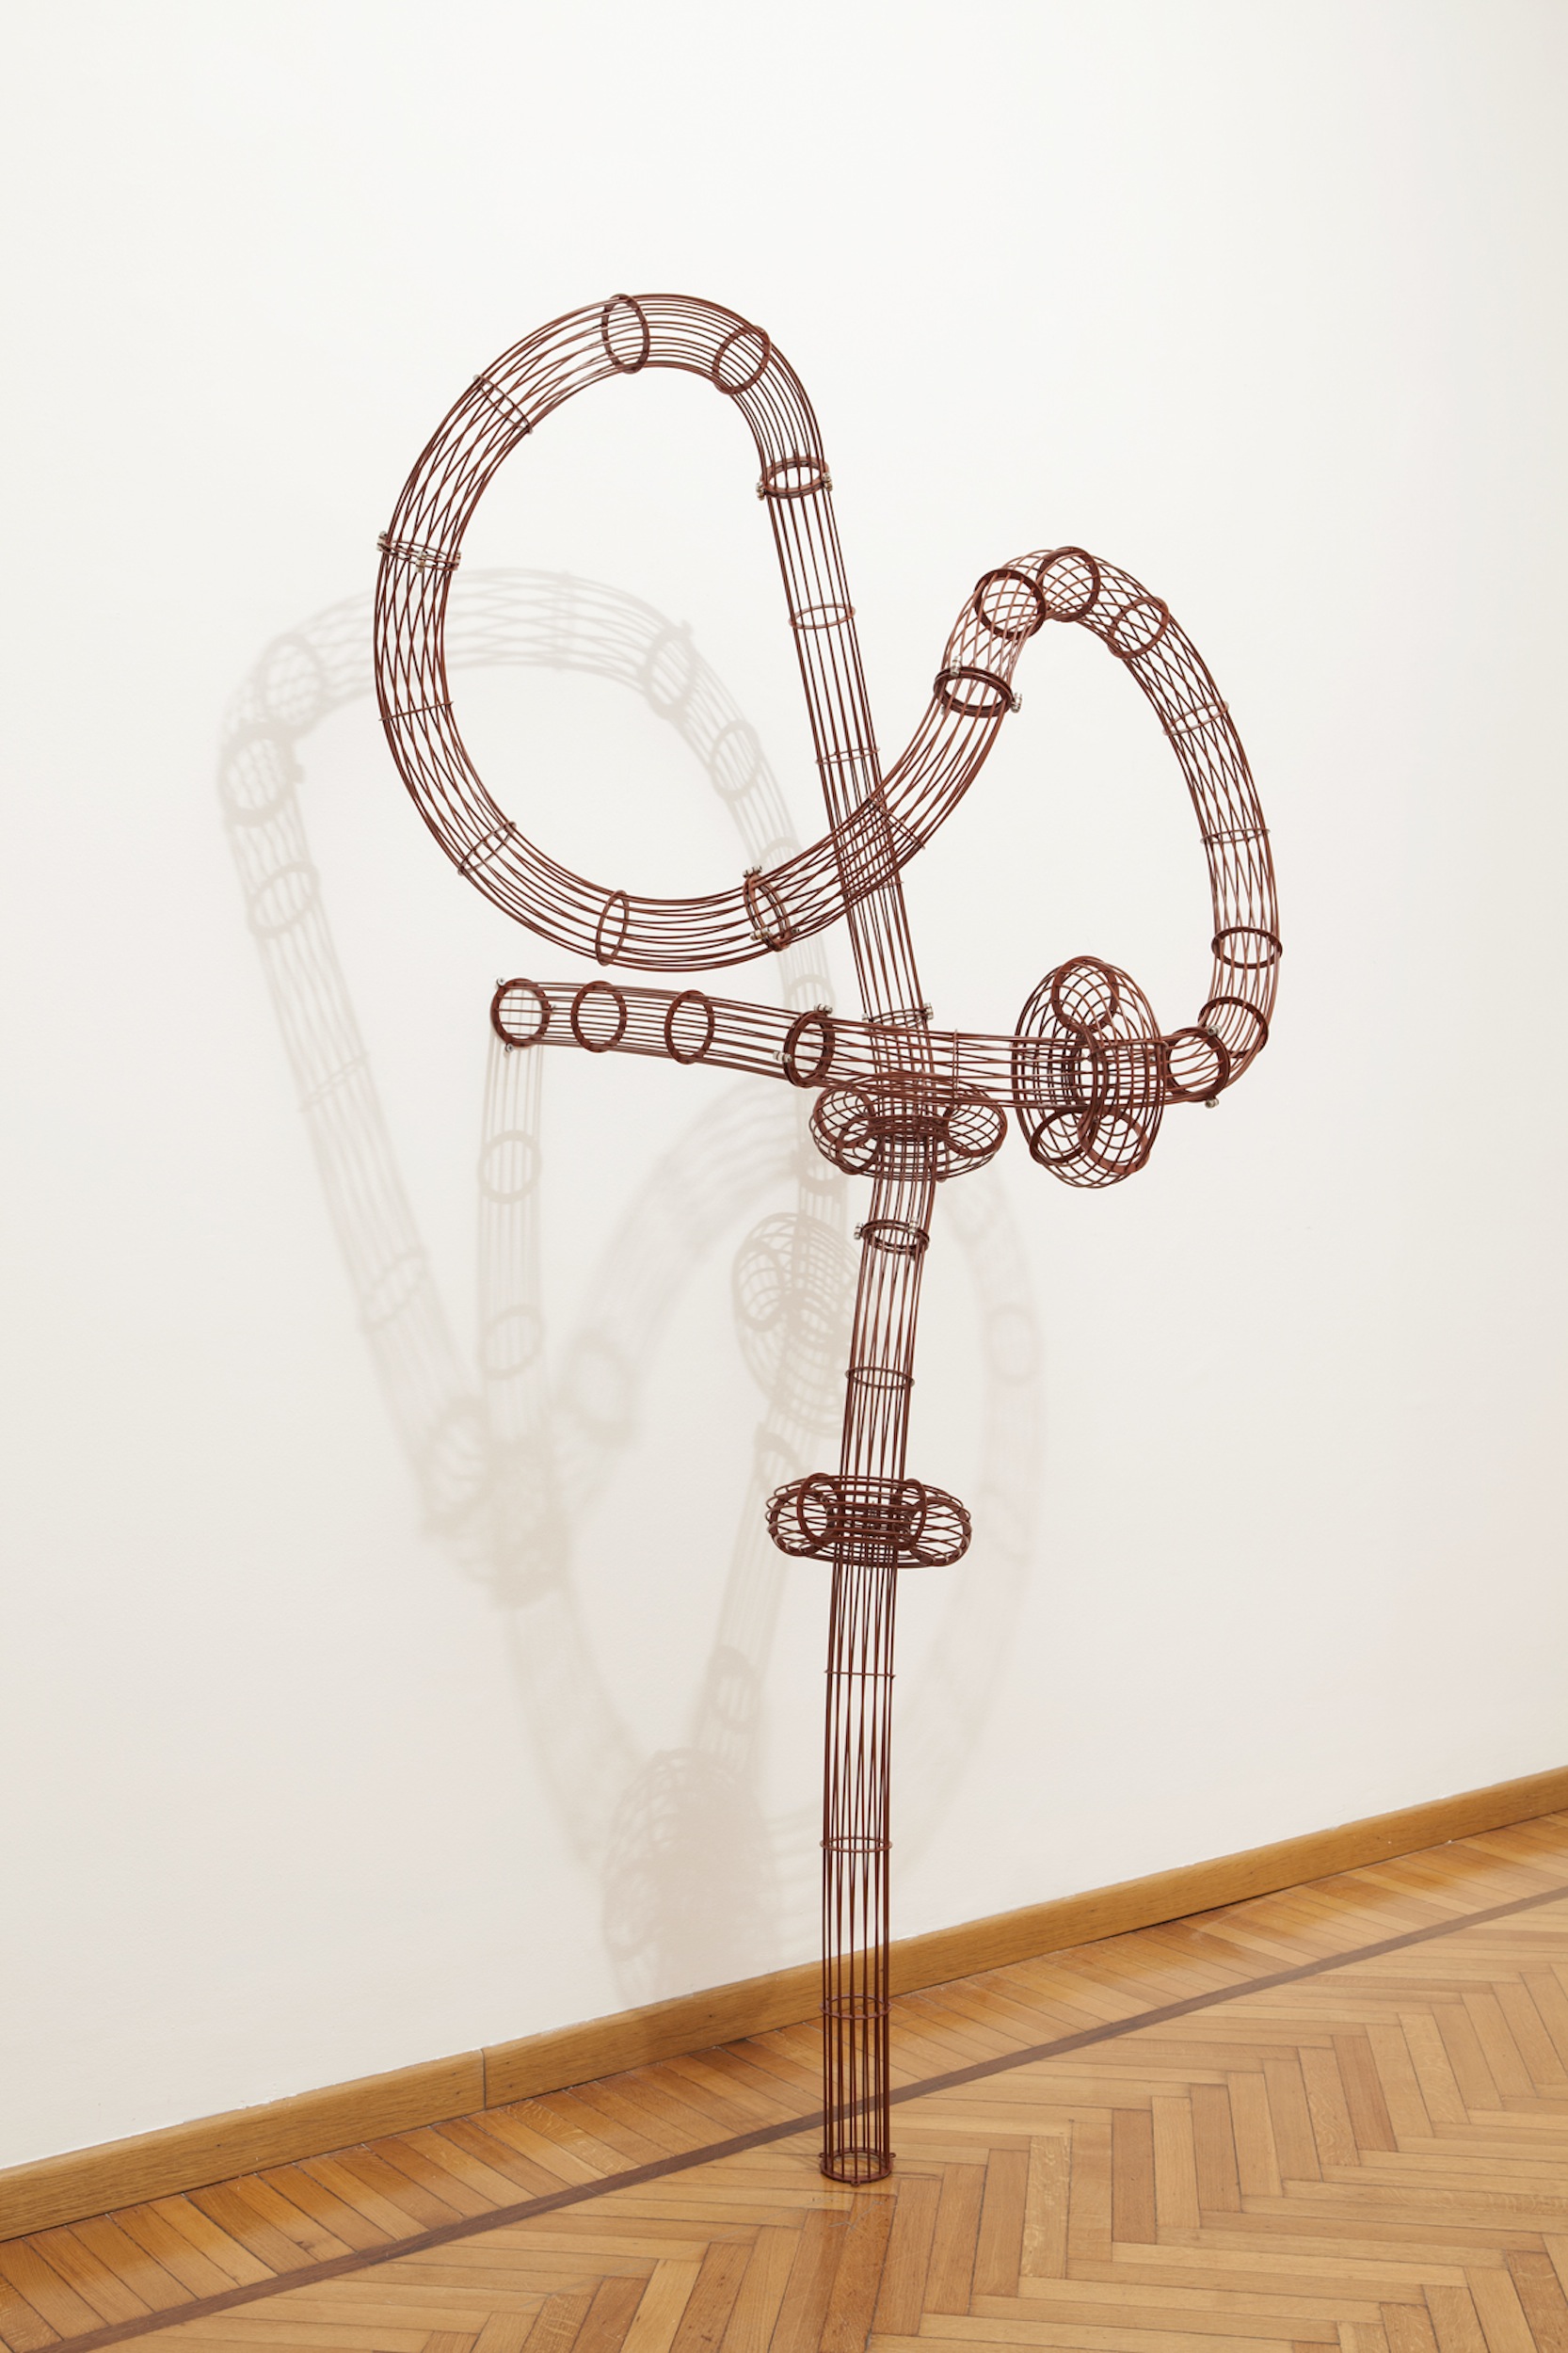   Untitled (Climbing)   Powder Coated Steel, Stainless Steel Spacers  250 x 100 x 65 cm  &nbsp; 